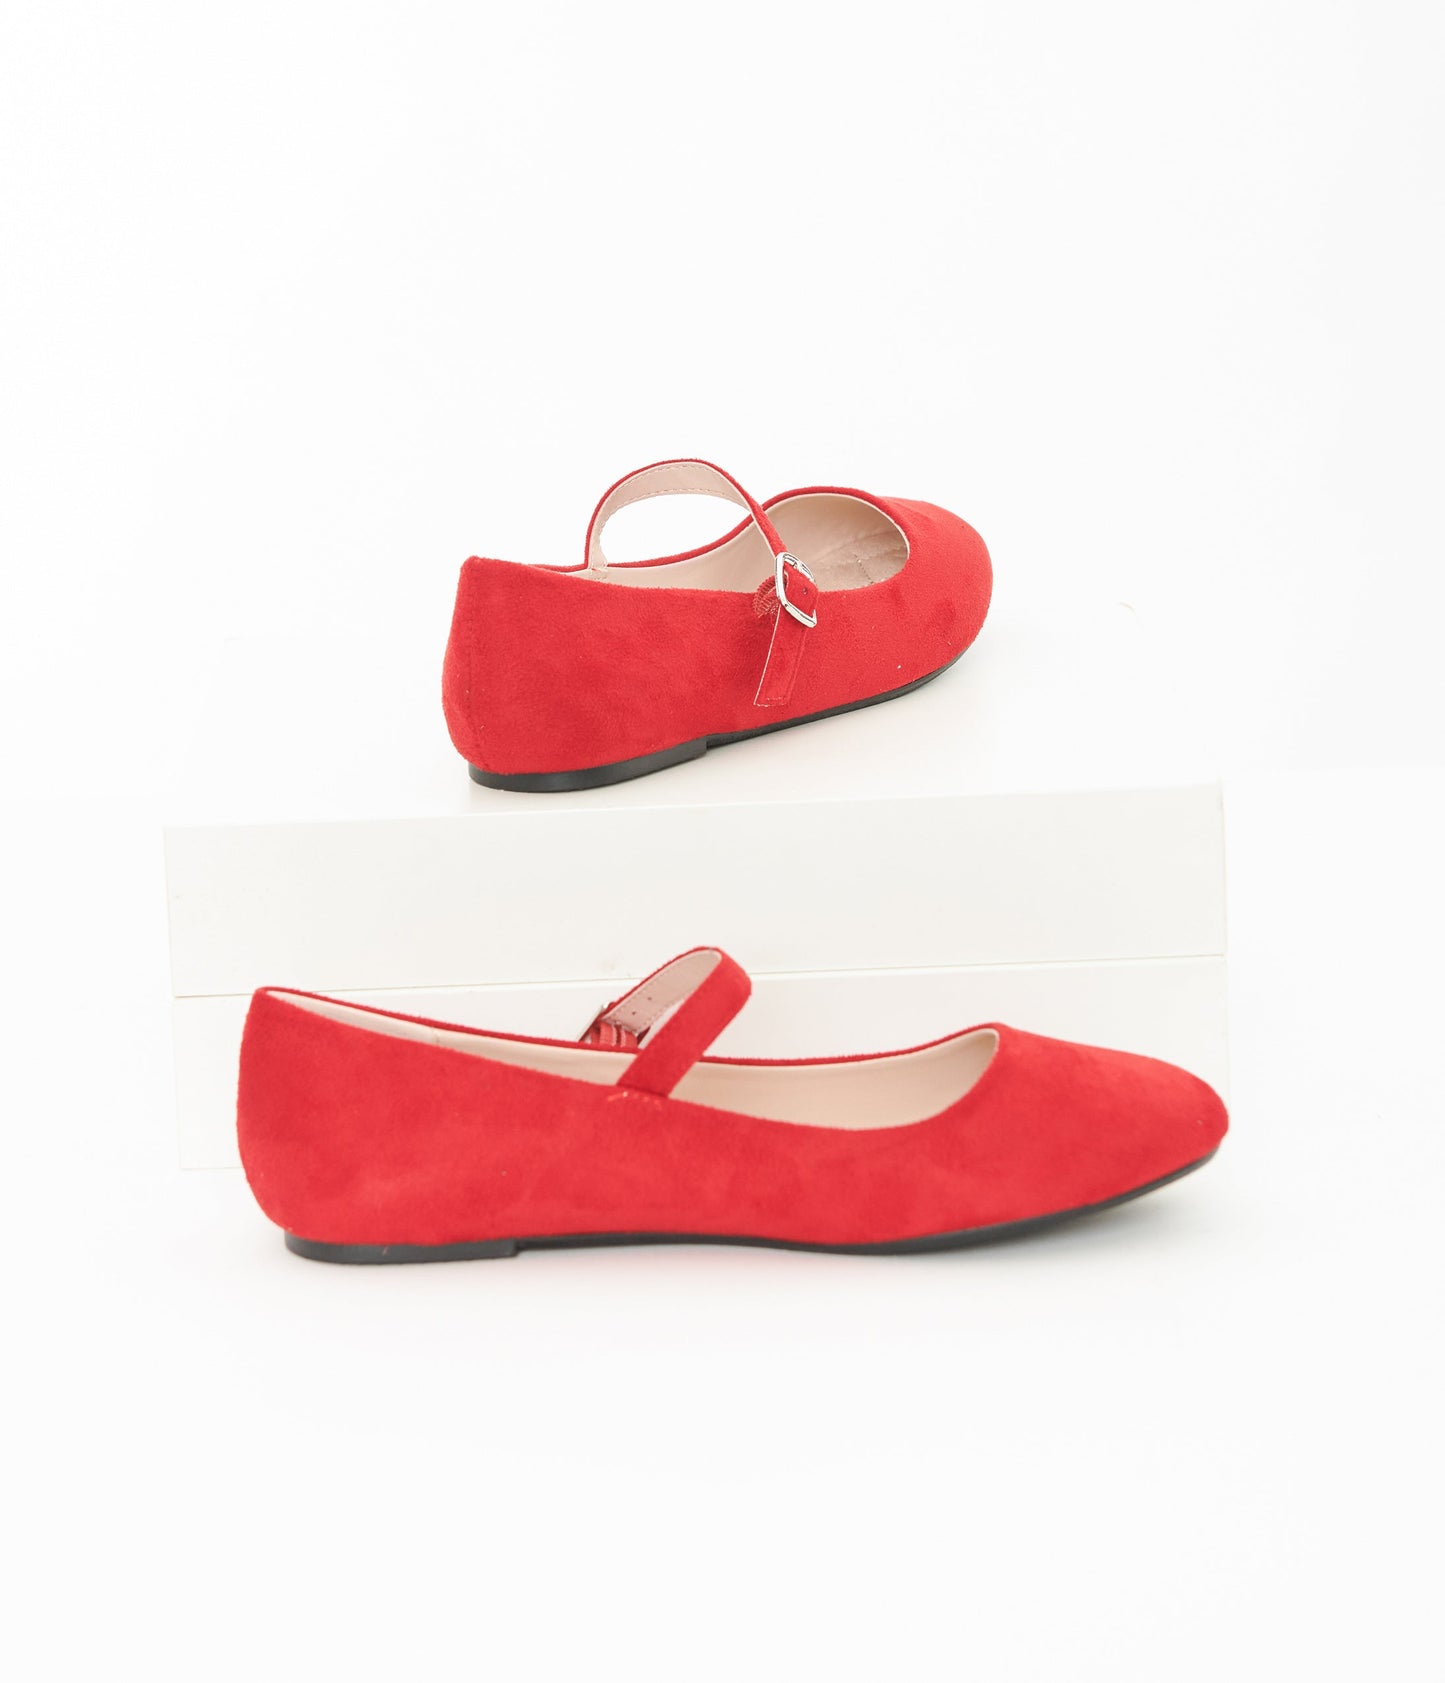 Red Suede Mary Jane Flats - Unique Vintage - Womens, SHOES, FLATS